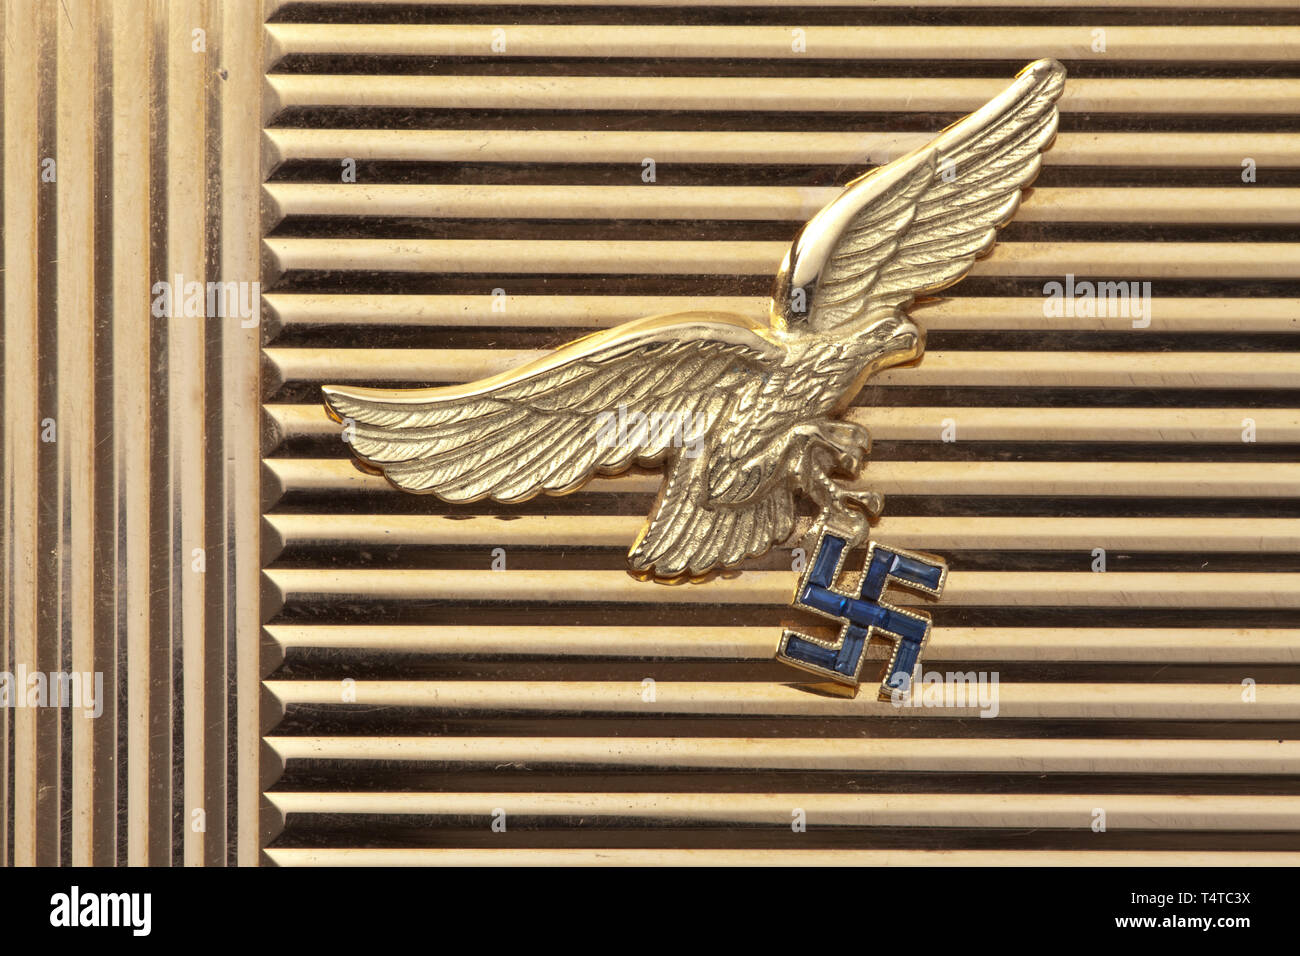 Hermann Göring (1893 - 1946) - a cigarette case presented to Ernst Udet Gold, the applied national eagle studded with blue sapphires. Fluted surface in French Art Déco style, the smooth inside of the lid engraved with presentation inscription 'Meinem Freund Erni mit besten Geburtstagswünschen - 26.IV.38 - Hermann Göring' (tr. 'For my friend Erni with best wishes for his birthday - 26 April 38 - Hermann Göring'). Hallmark '750', no manufacturer's mark, presumably from the workshop of the jeweller Karl Dluzewski in Berlin, dimensions 80 x 130 mm, weight 260 g. Enclosed are th, Editorial-Use-Only Stock Photo